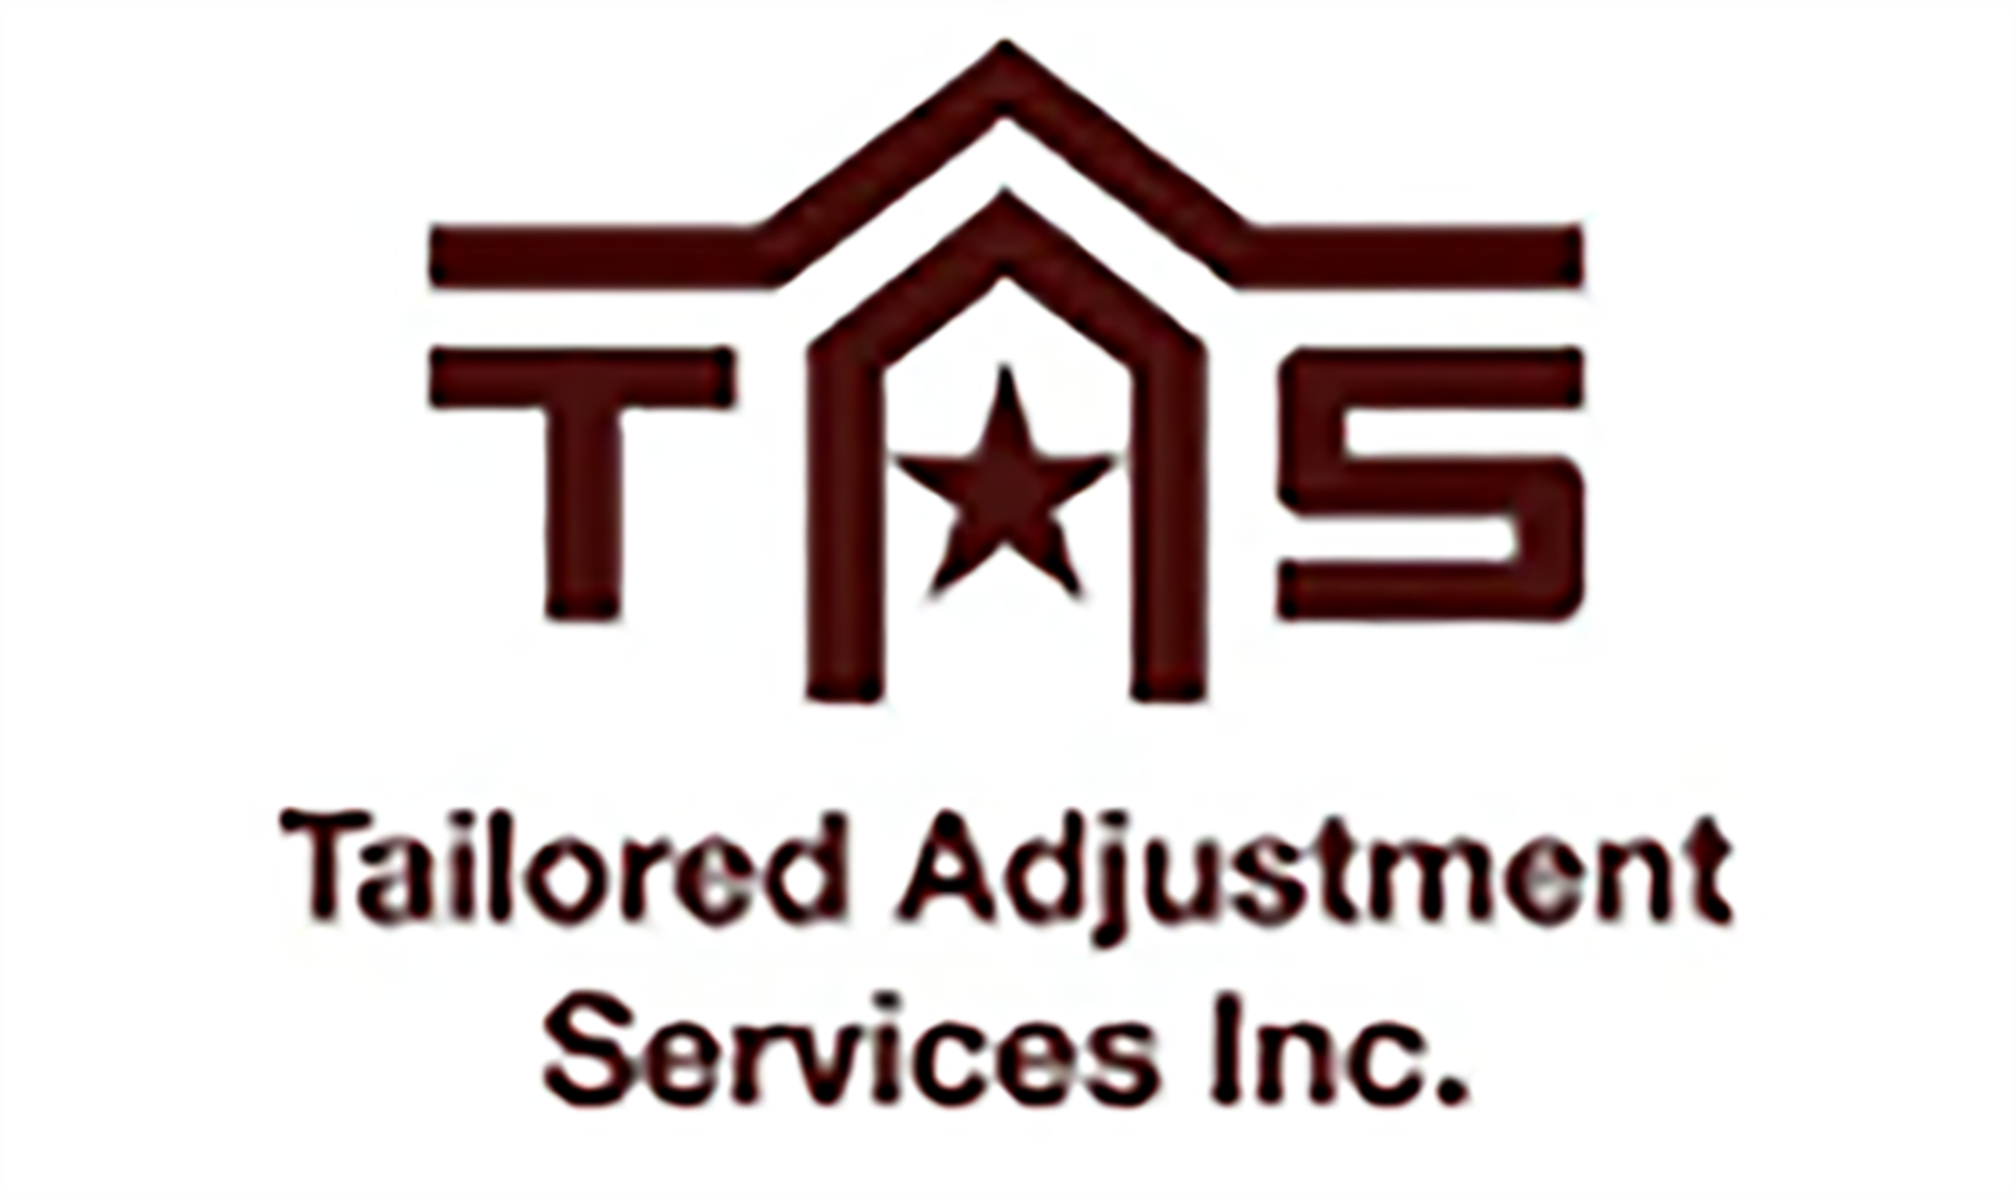 Tailored Adjustment Services